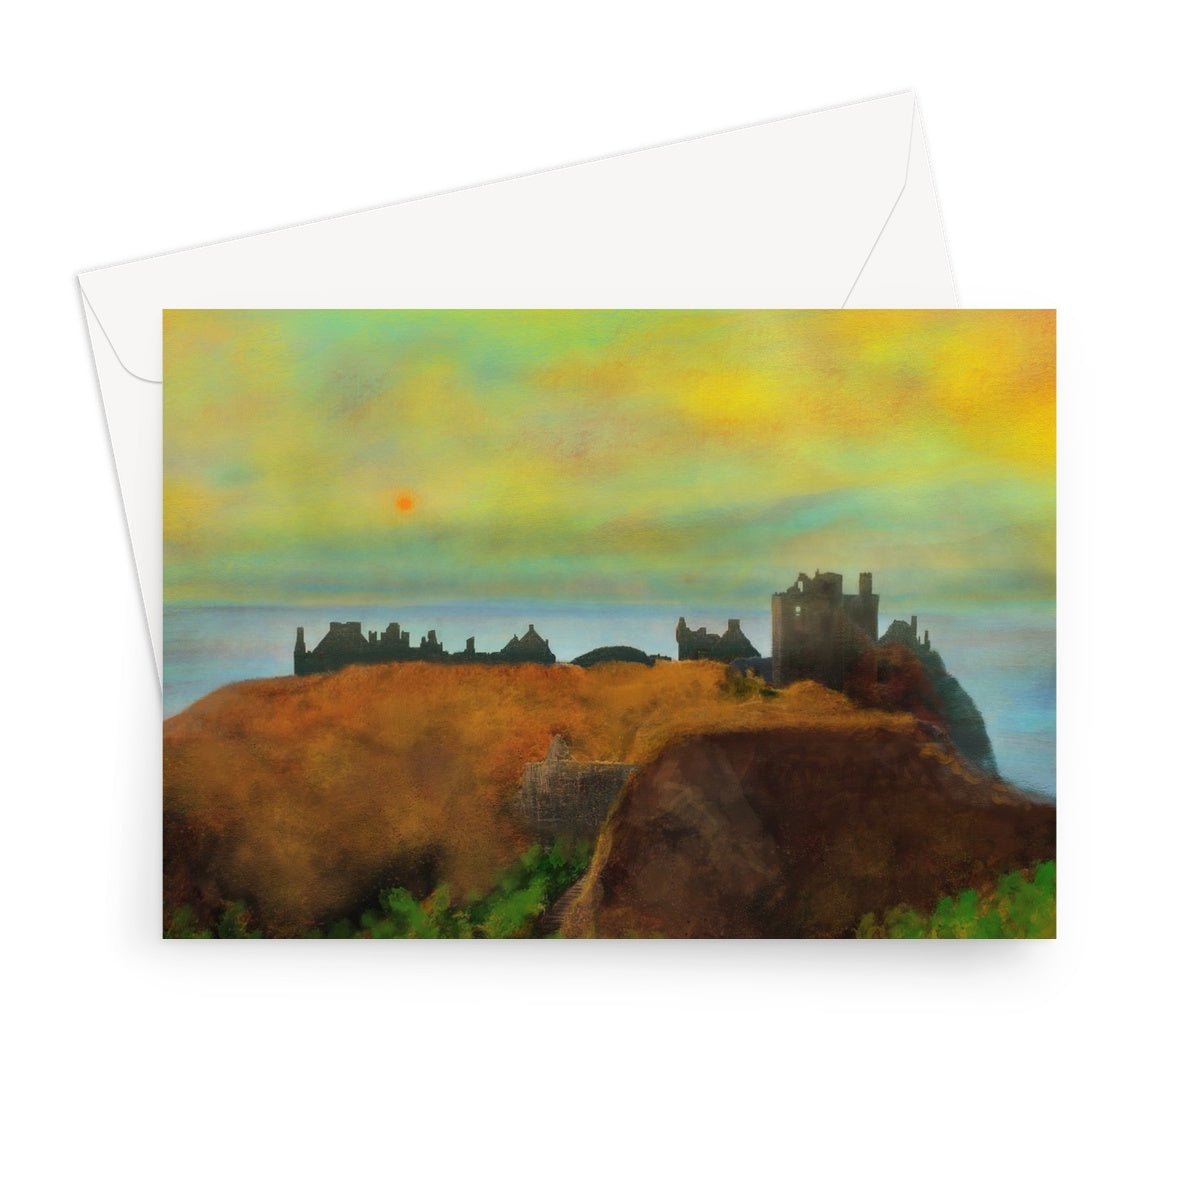 Dunnottar Castle Art Gifts Greeting Card-Greetings Cards-Scottish Castles Art Gallery-7"x5"-1 Card-Paintings, Prints, Homeware, Art Gifts From Scotland By Scottish Artist Kevin Hunter